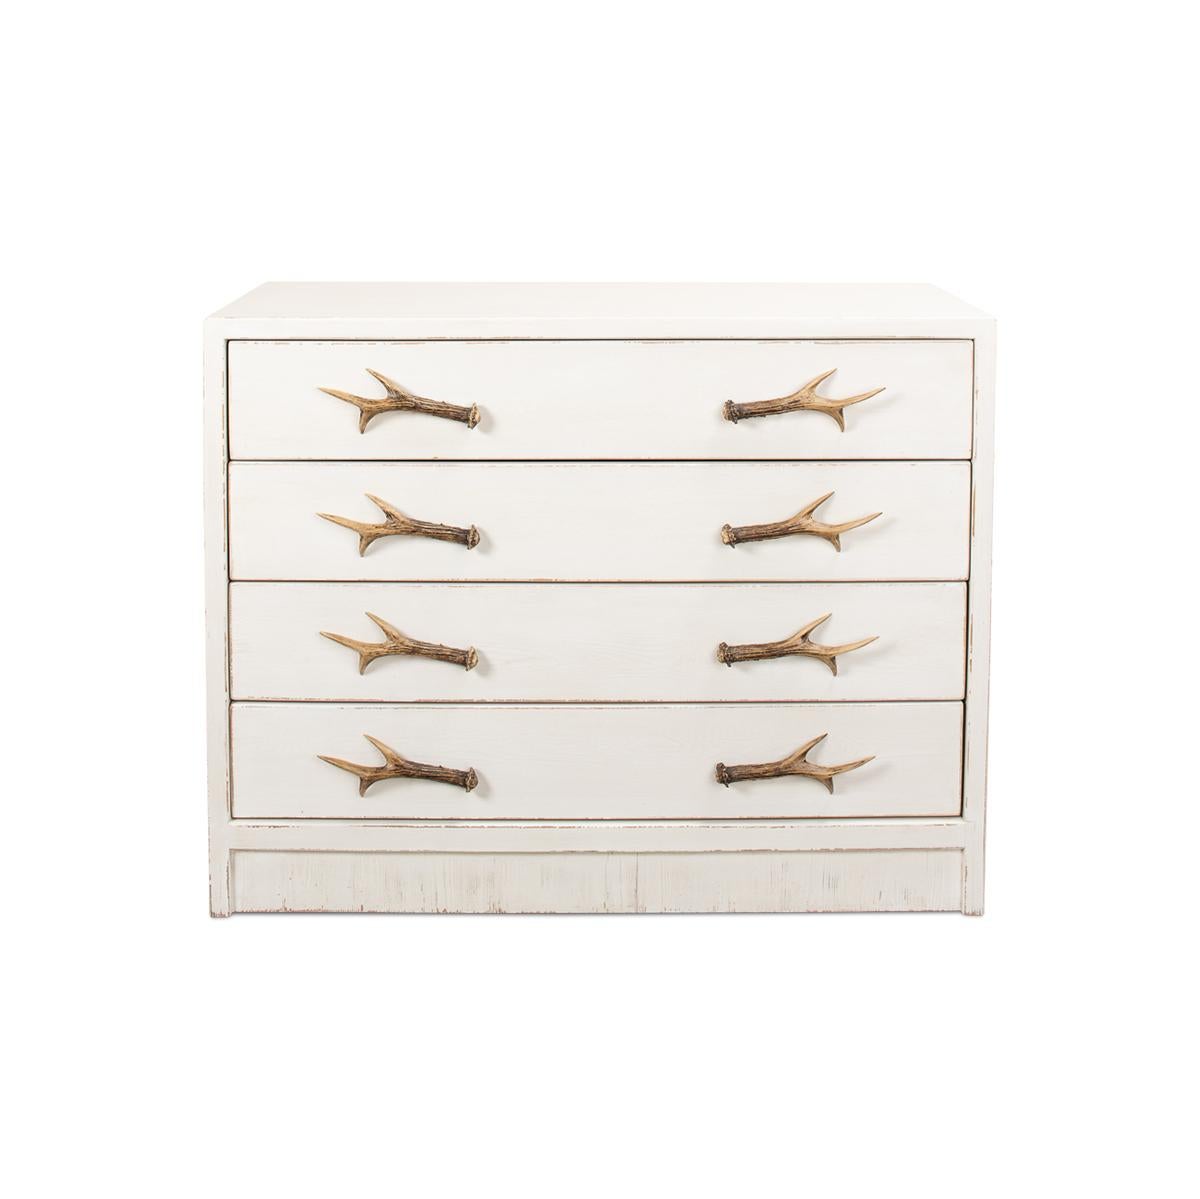 Pine chest of drawers has a whitewash finish and is accented with cast metal antler drawer pulls. 

Dimensions: 43